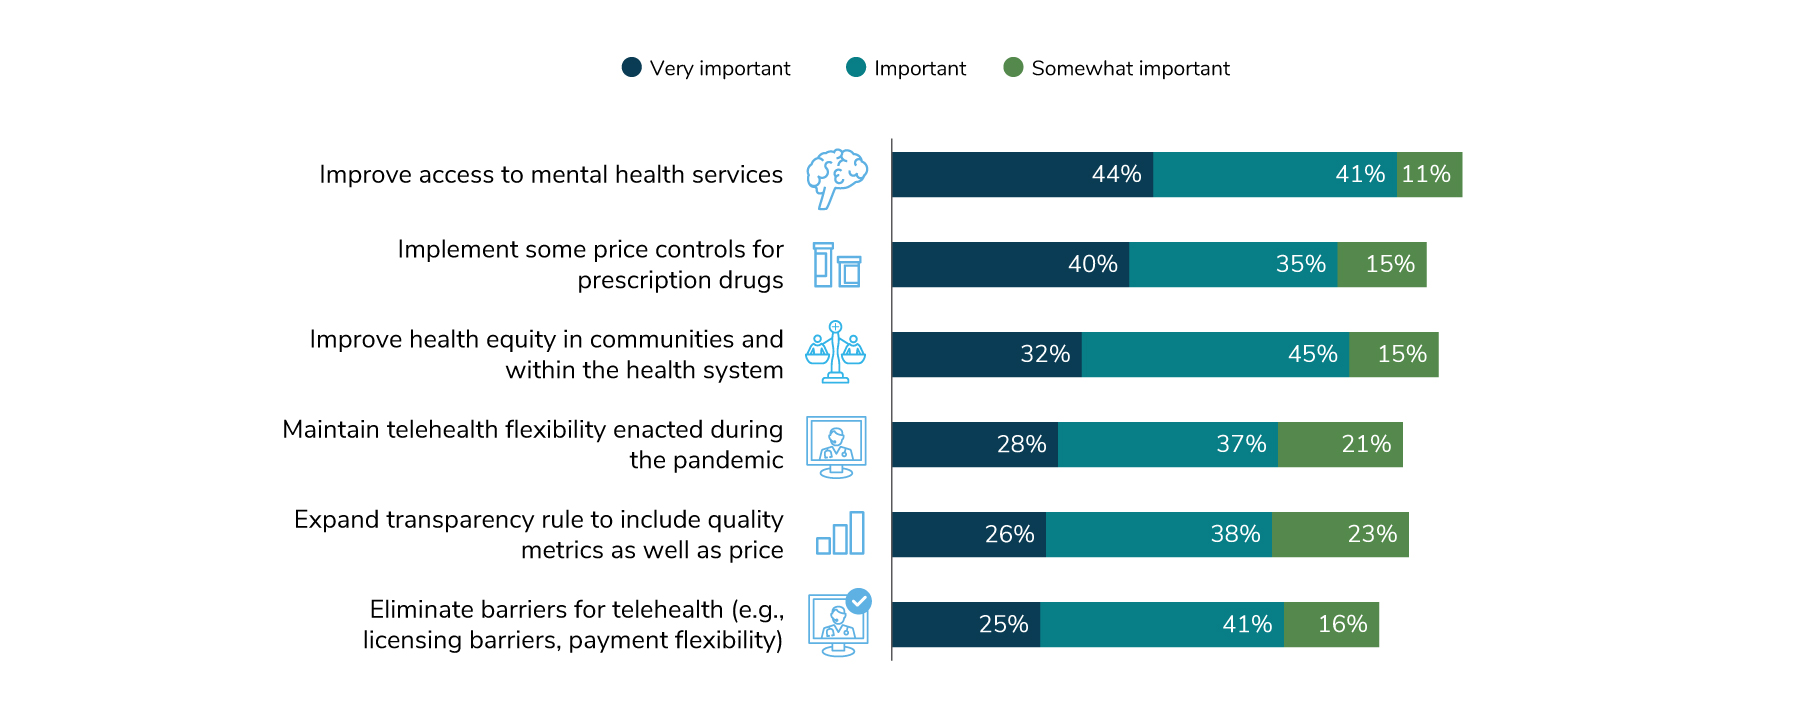 Employers feel that it is important for Congress to enact legislation that improves access to mental health services (85%), improves health equity in communities (77%) and implement some price controls for prescription drugs (75%).